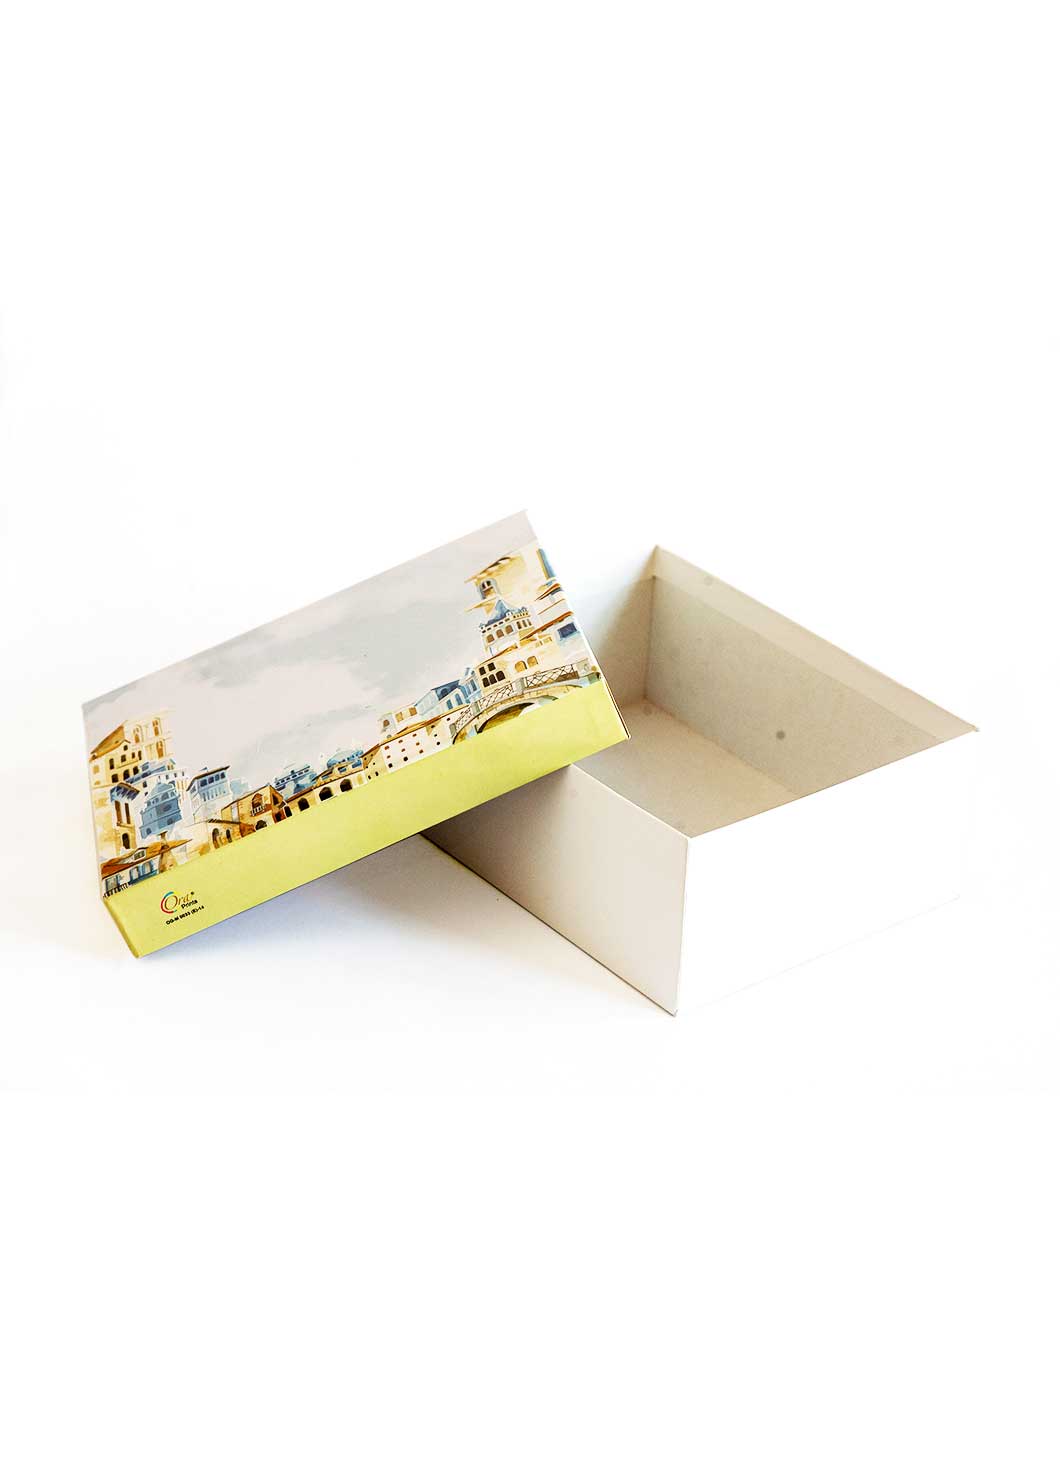 City View Design Box for packing